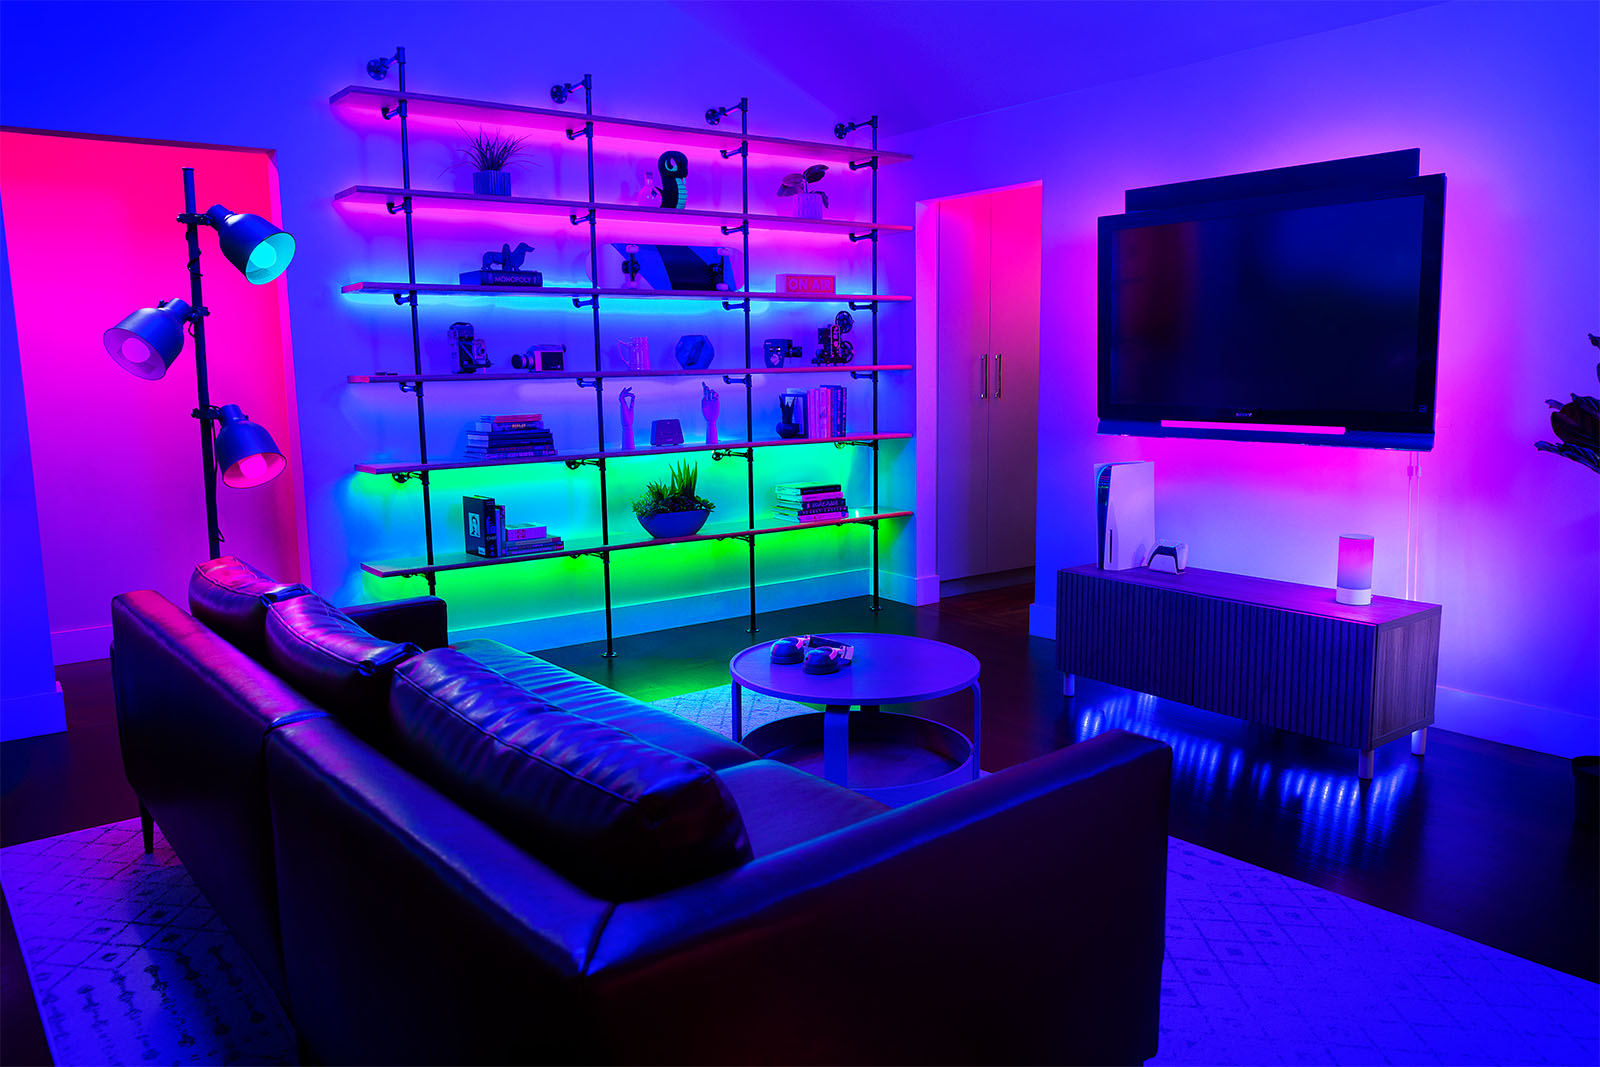 A living room in an ultraviolet glow produces by Razer's new smart lighting products.